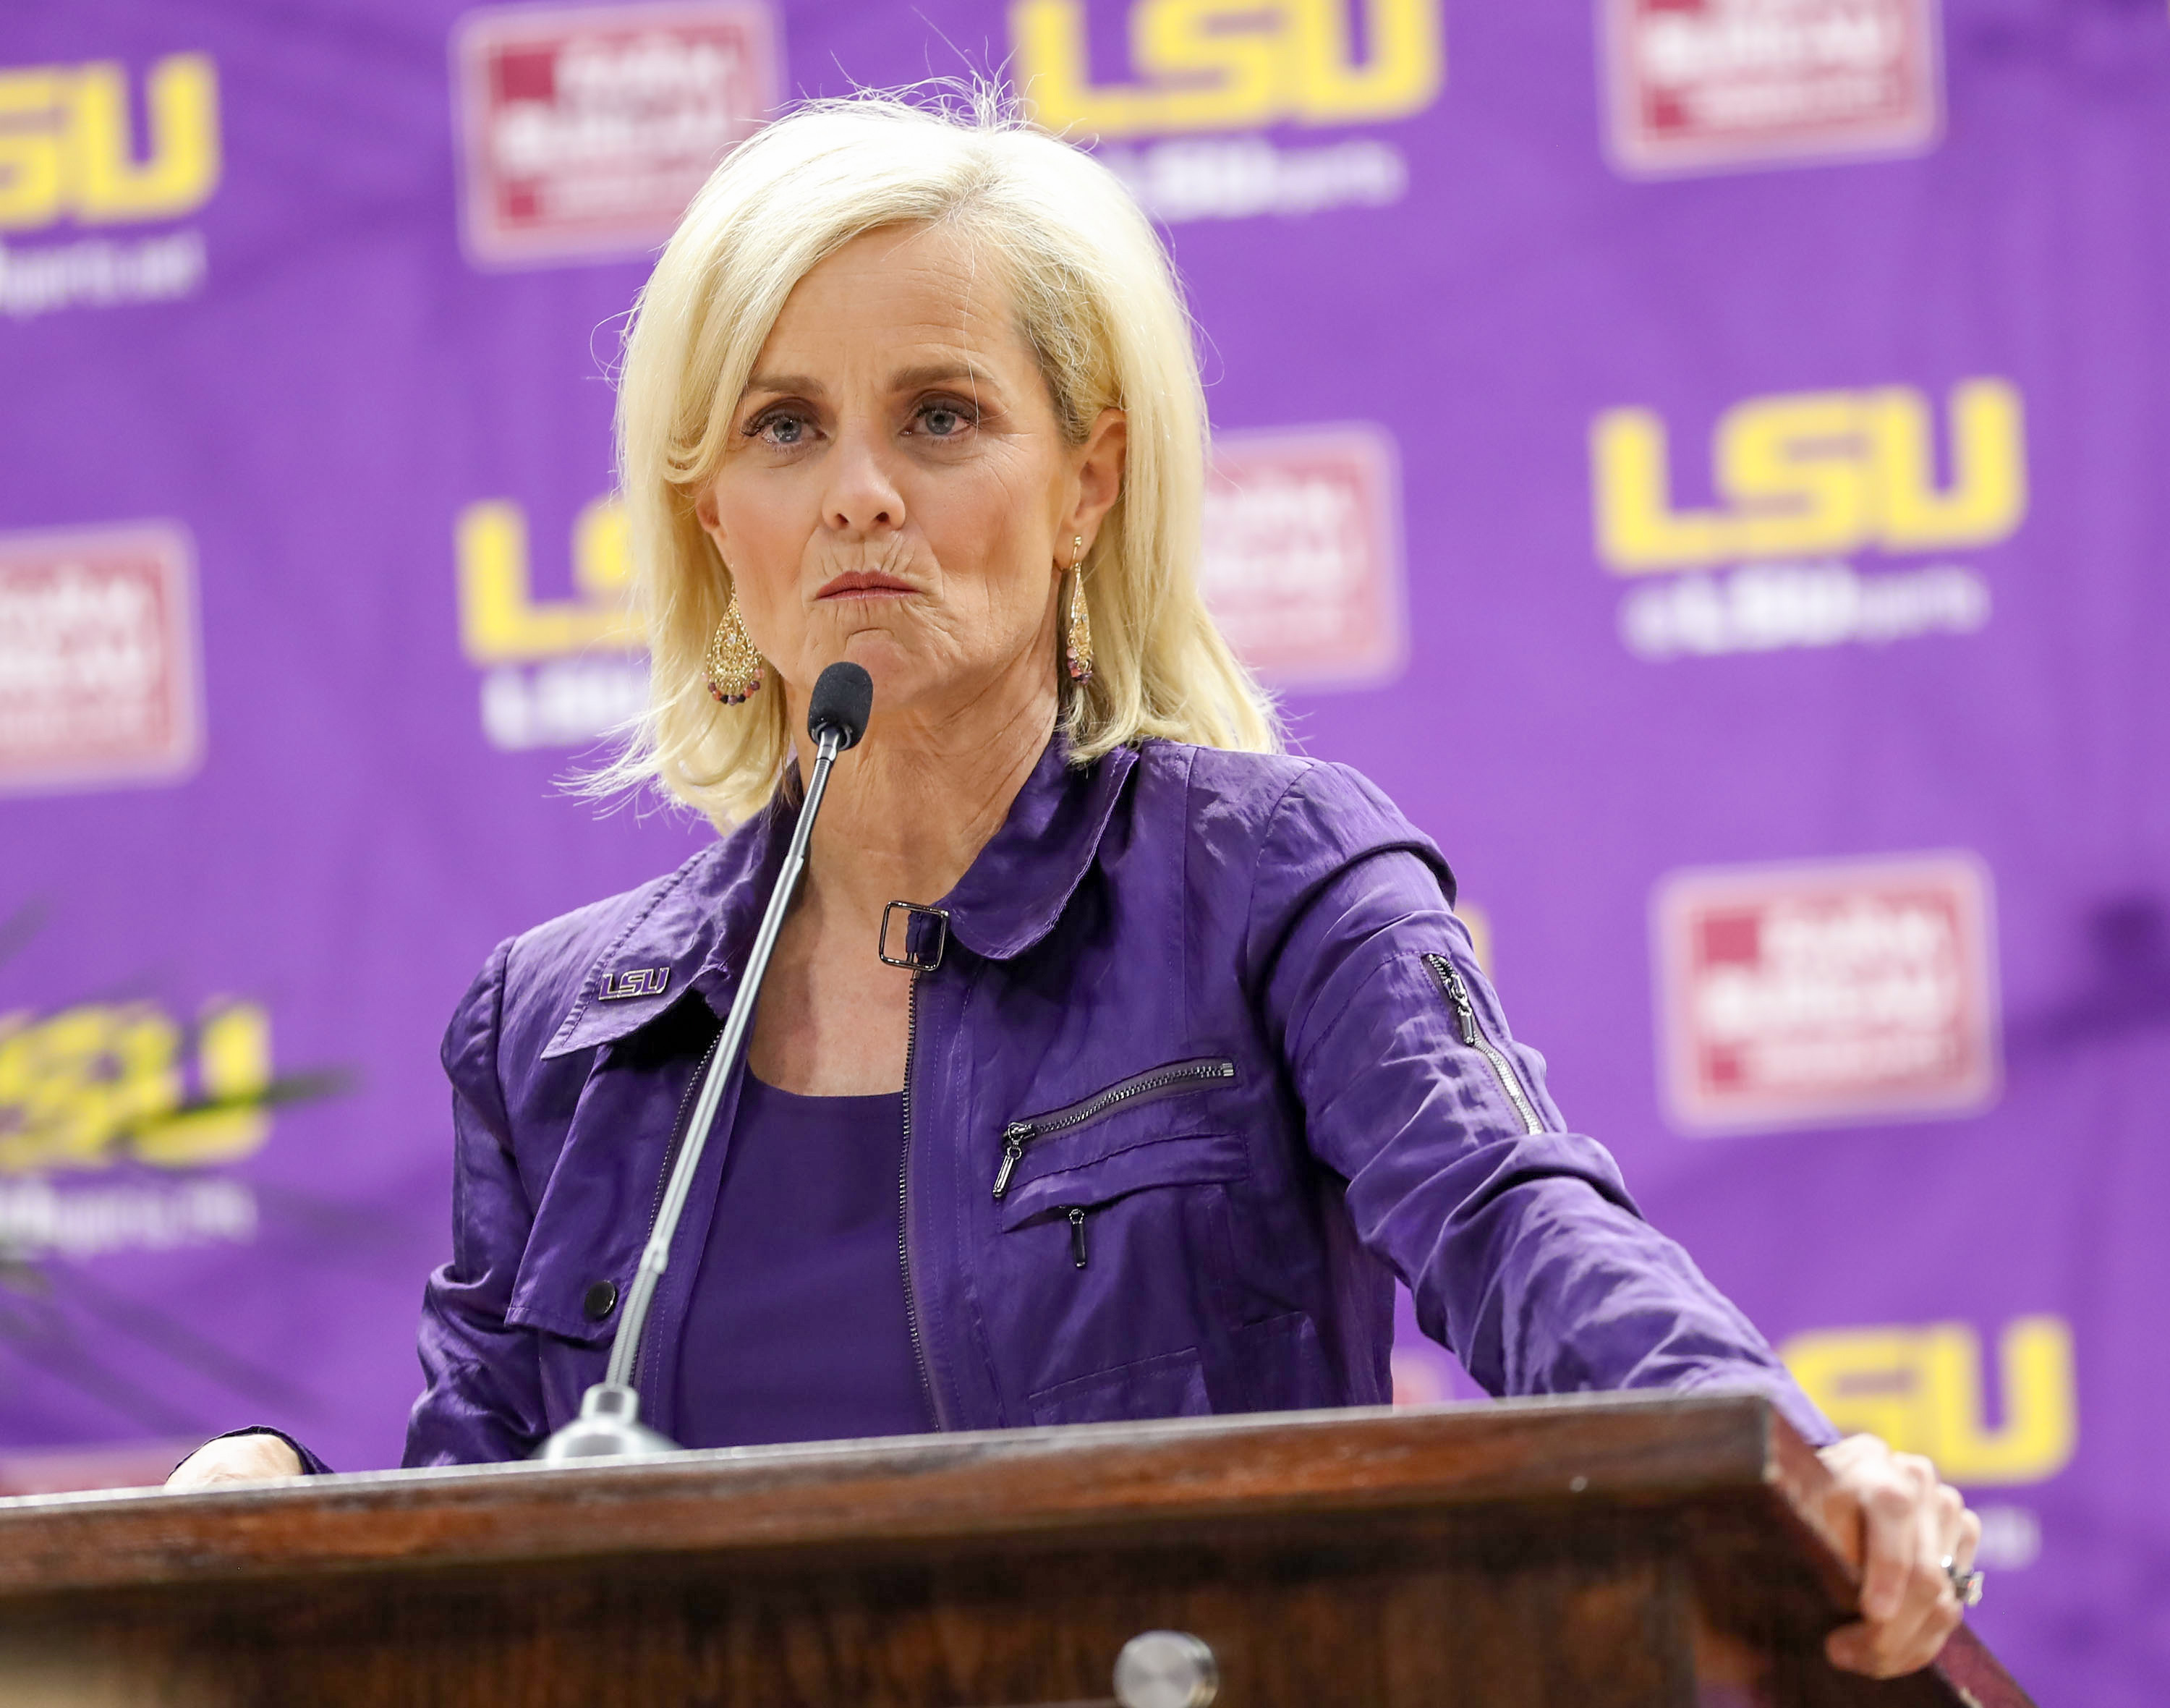 Mulkey, 59, was born in California but grew up in Tickfaw, La., about 50 miles from LSU's campus in Baton Rouge.